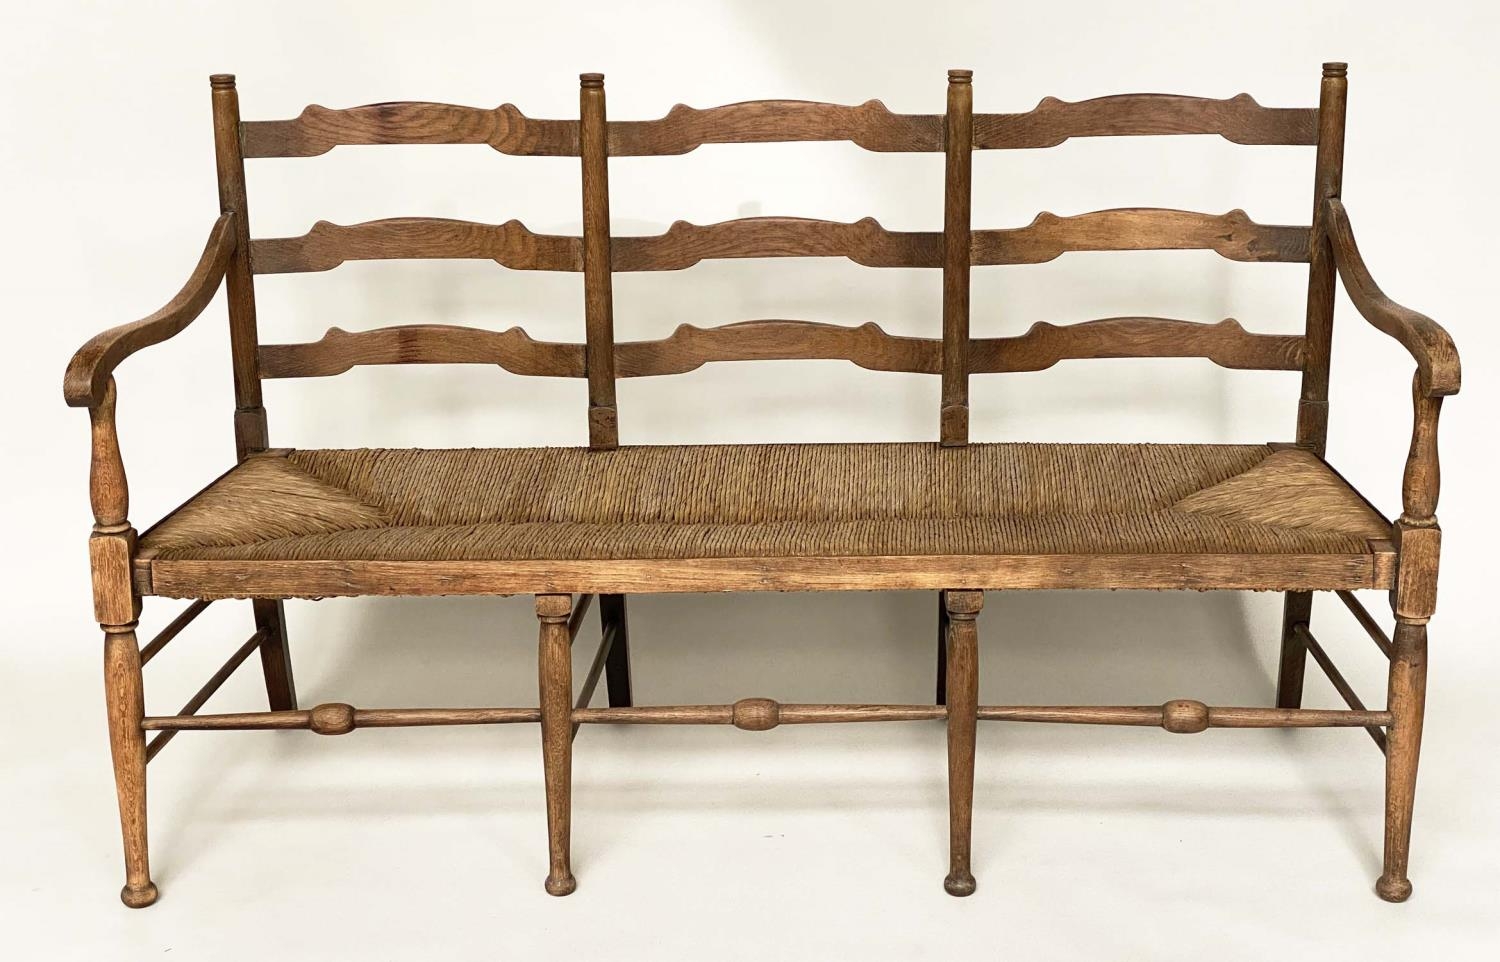 HALL BENCH, early 20th century English oak with ladder back and rush seat, 157cm W. - Image 2 of 10